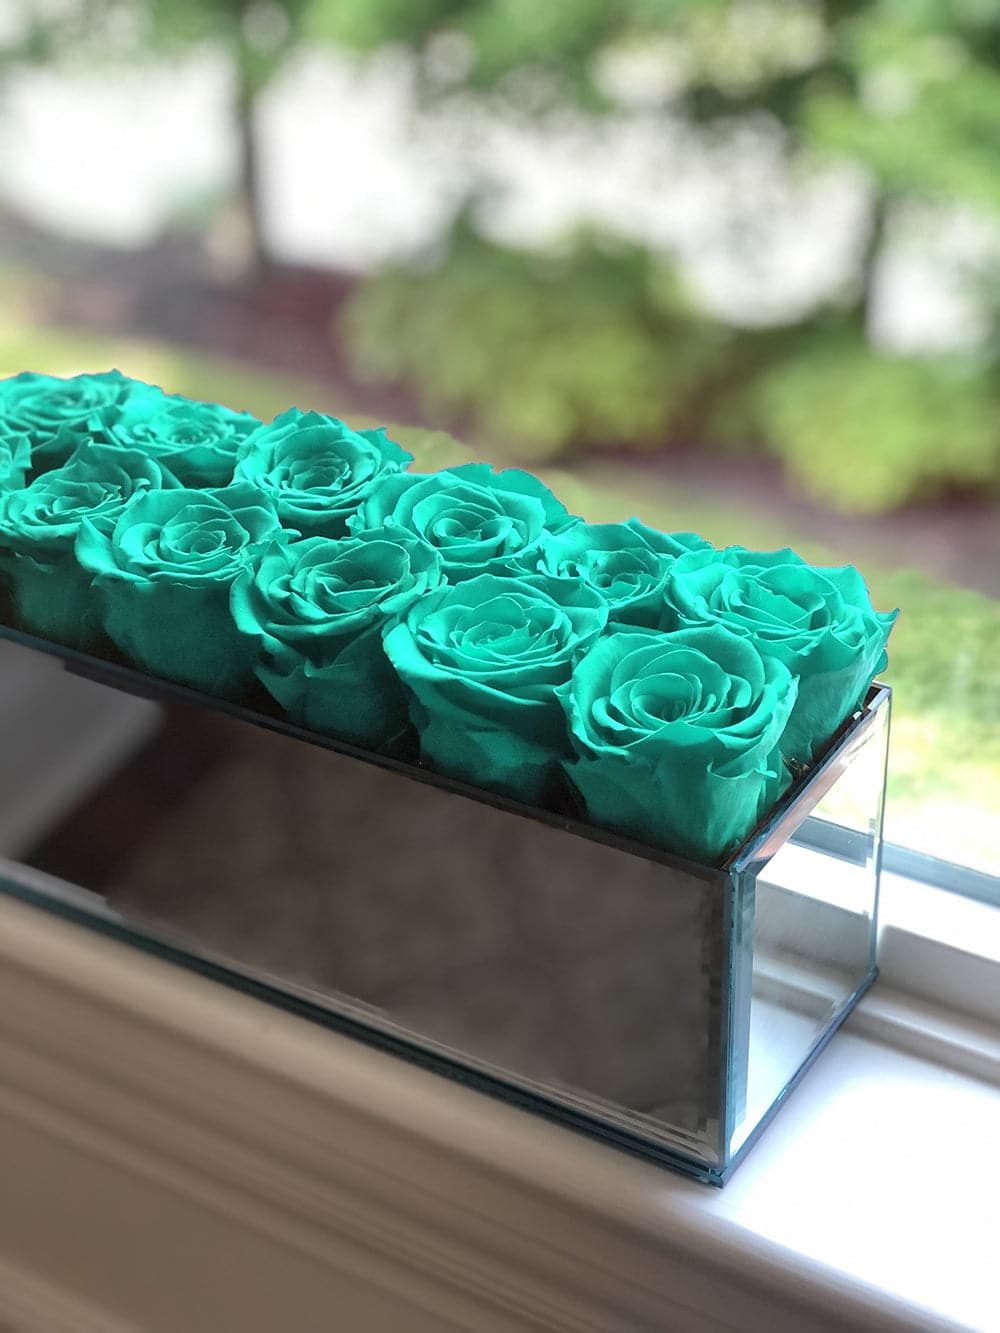 Silver Mirrored Table Centerpiece with Turquoise Roses